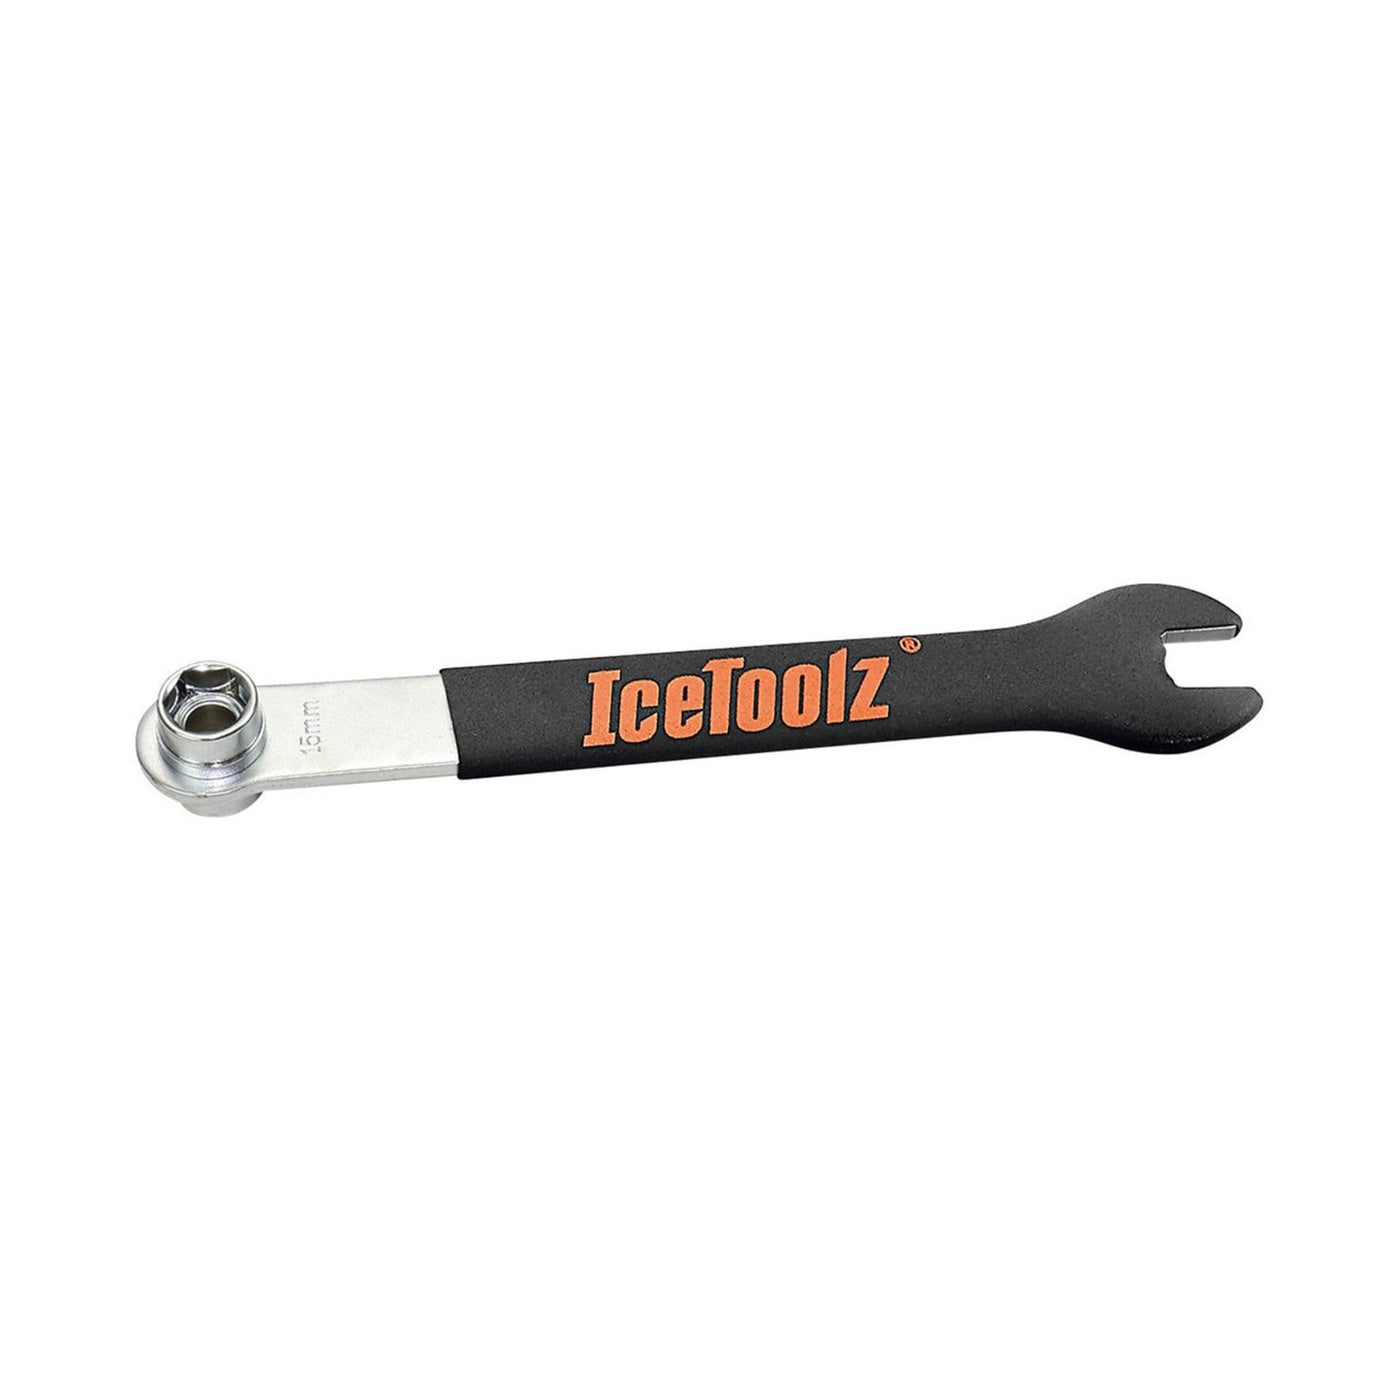 IceToolz 34B1 Pedal And Axle Wrench